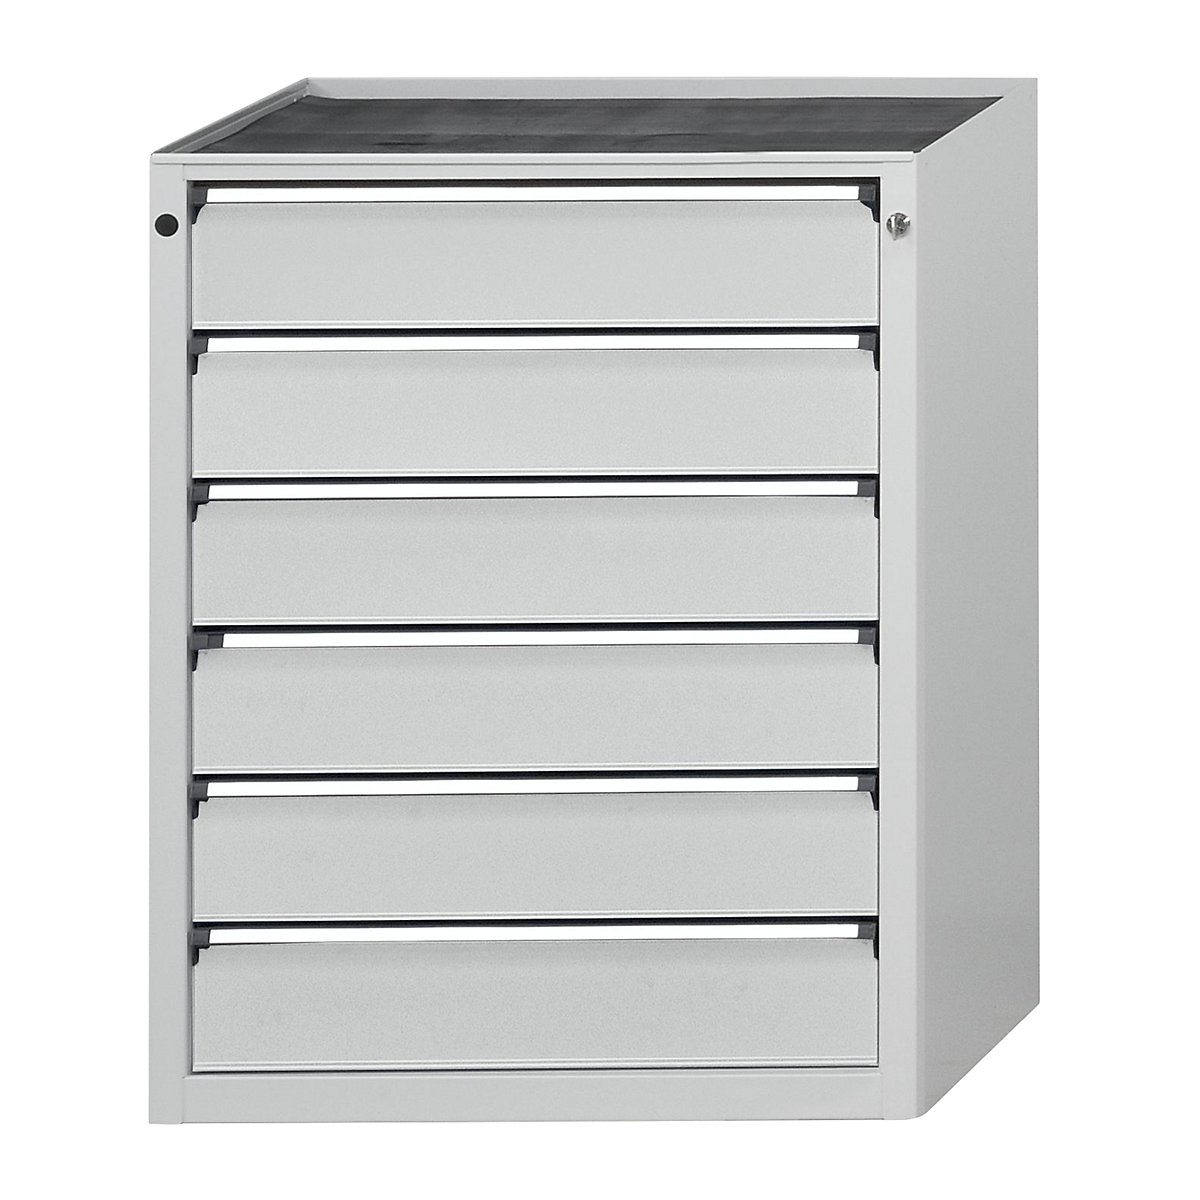 Drawer cupboard without worktop – ANKE, width 760 mm, 6 x 150 mm drawers, front in light grey-6